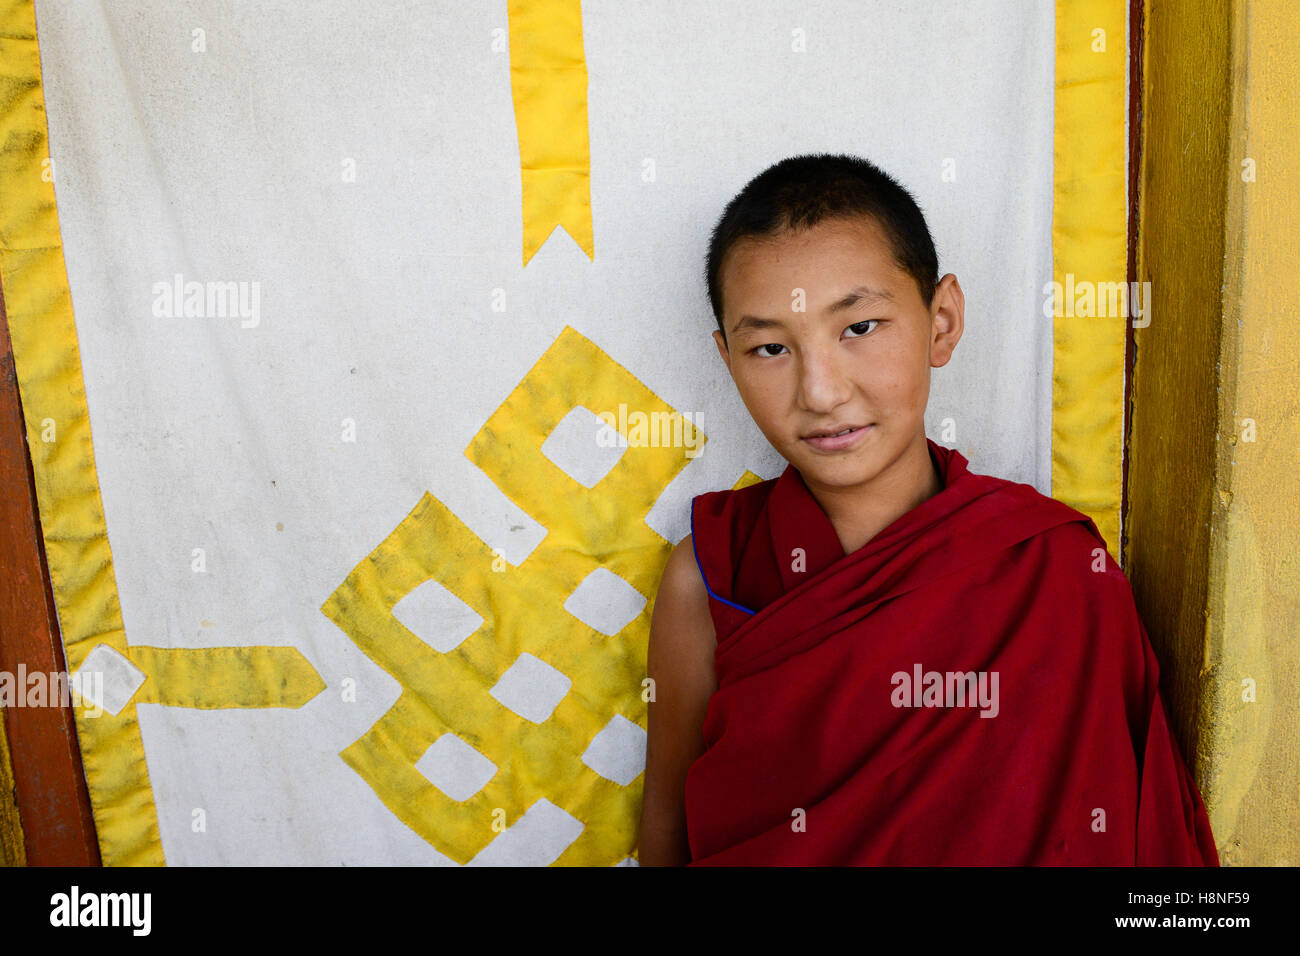 NEPAL Pokhara, tibetan refugee camp Tashi Ling, Shri Gaden Dhargyaling Monastery, young novice Lobsang Ngawang is 11 years old and belongs to a tibetan nomad family in Upper Mustang, background curtain with endless knot a symbol for luck in tibetan culture Stock Photo